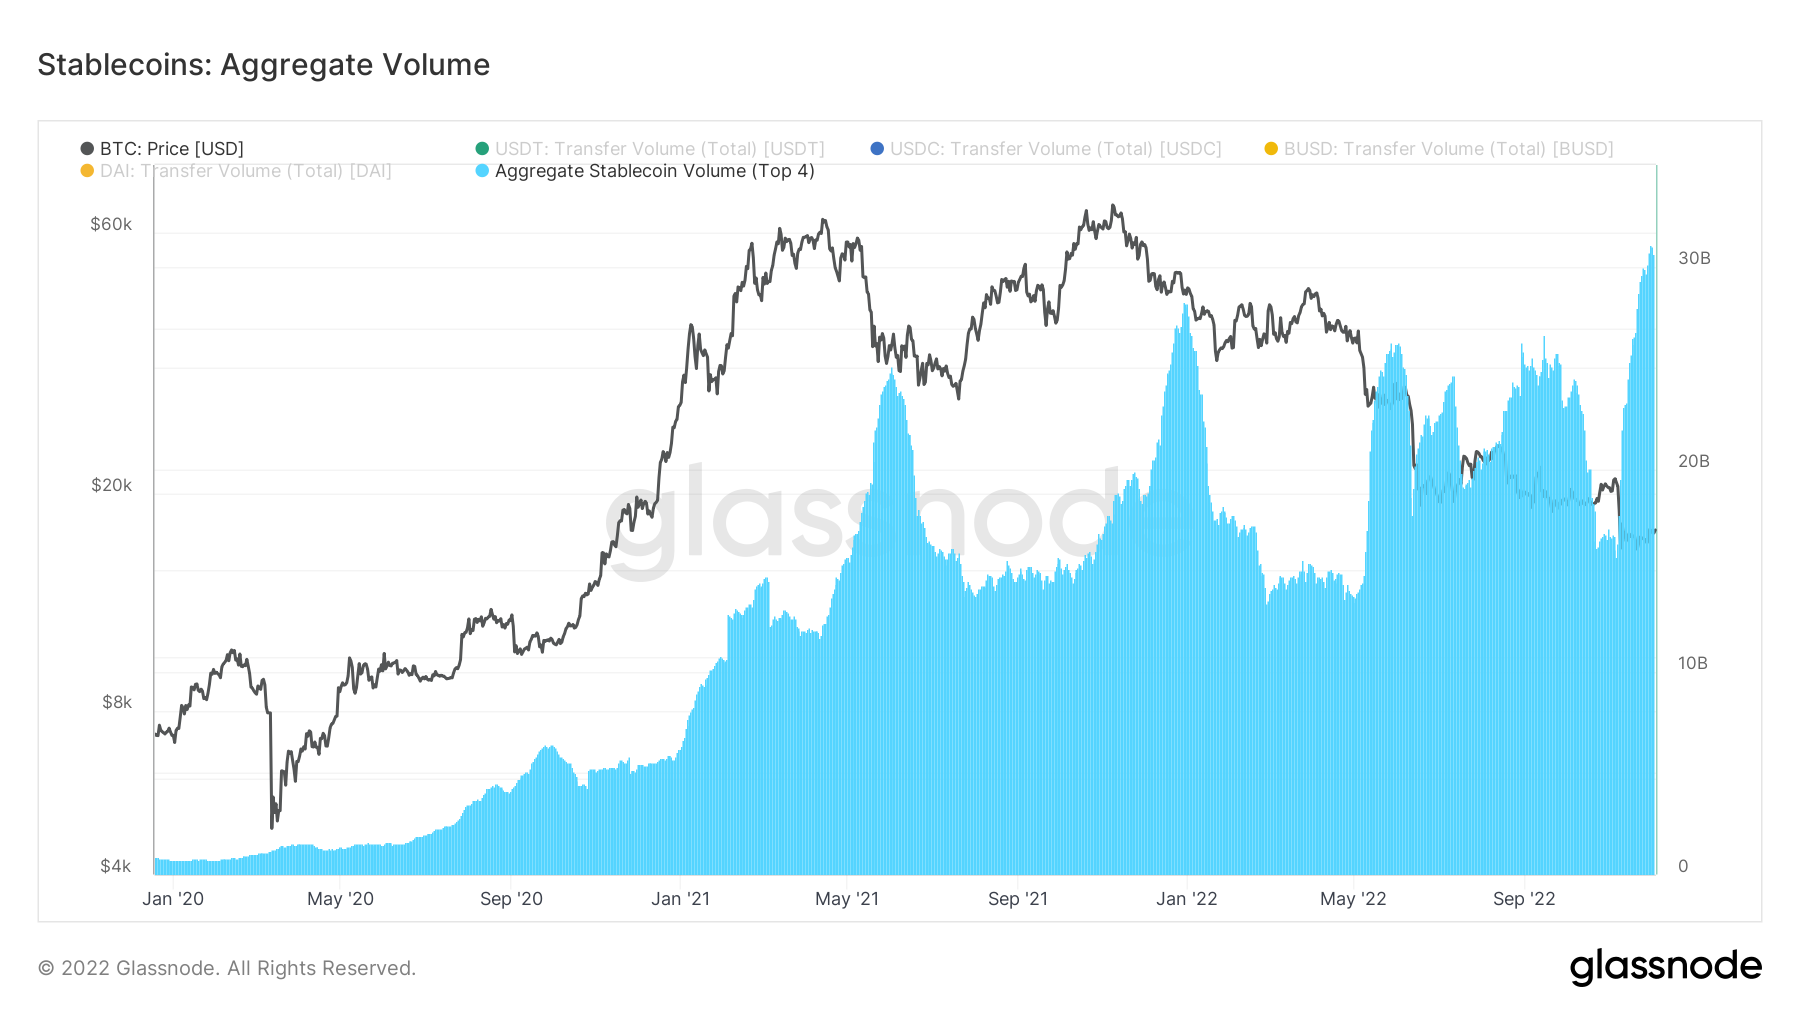 Stablecoin Aggregate Volume